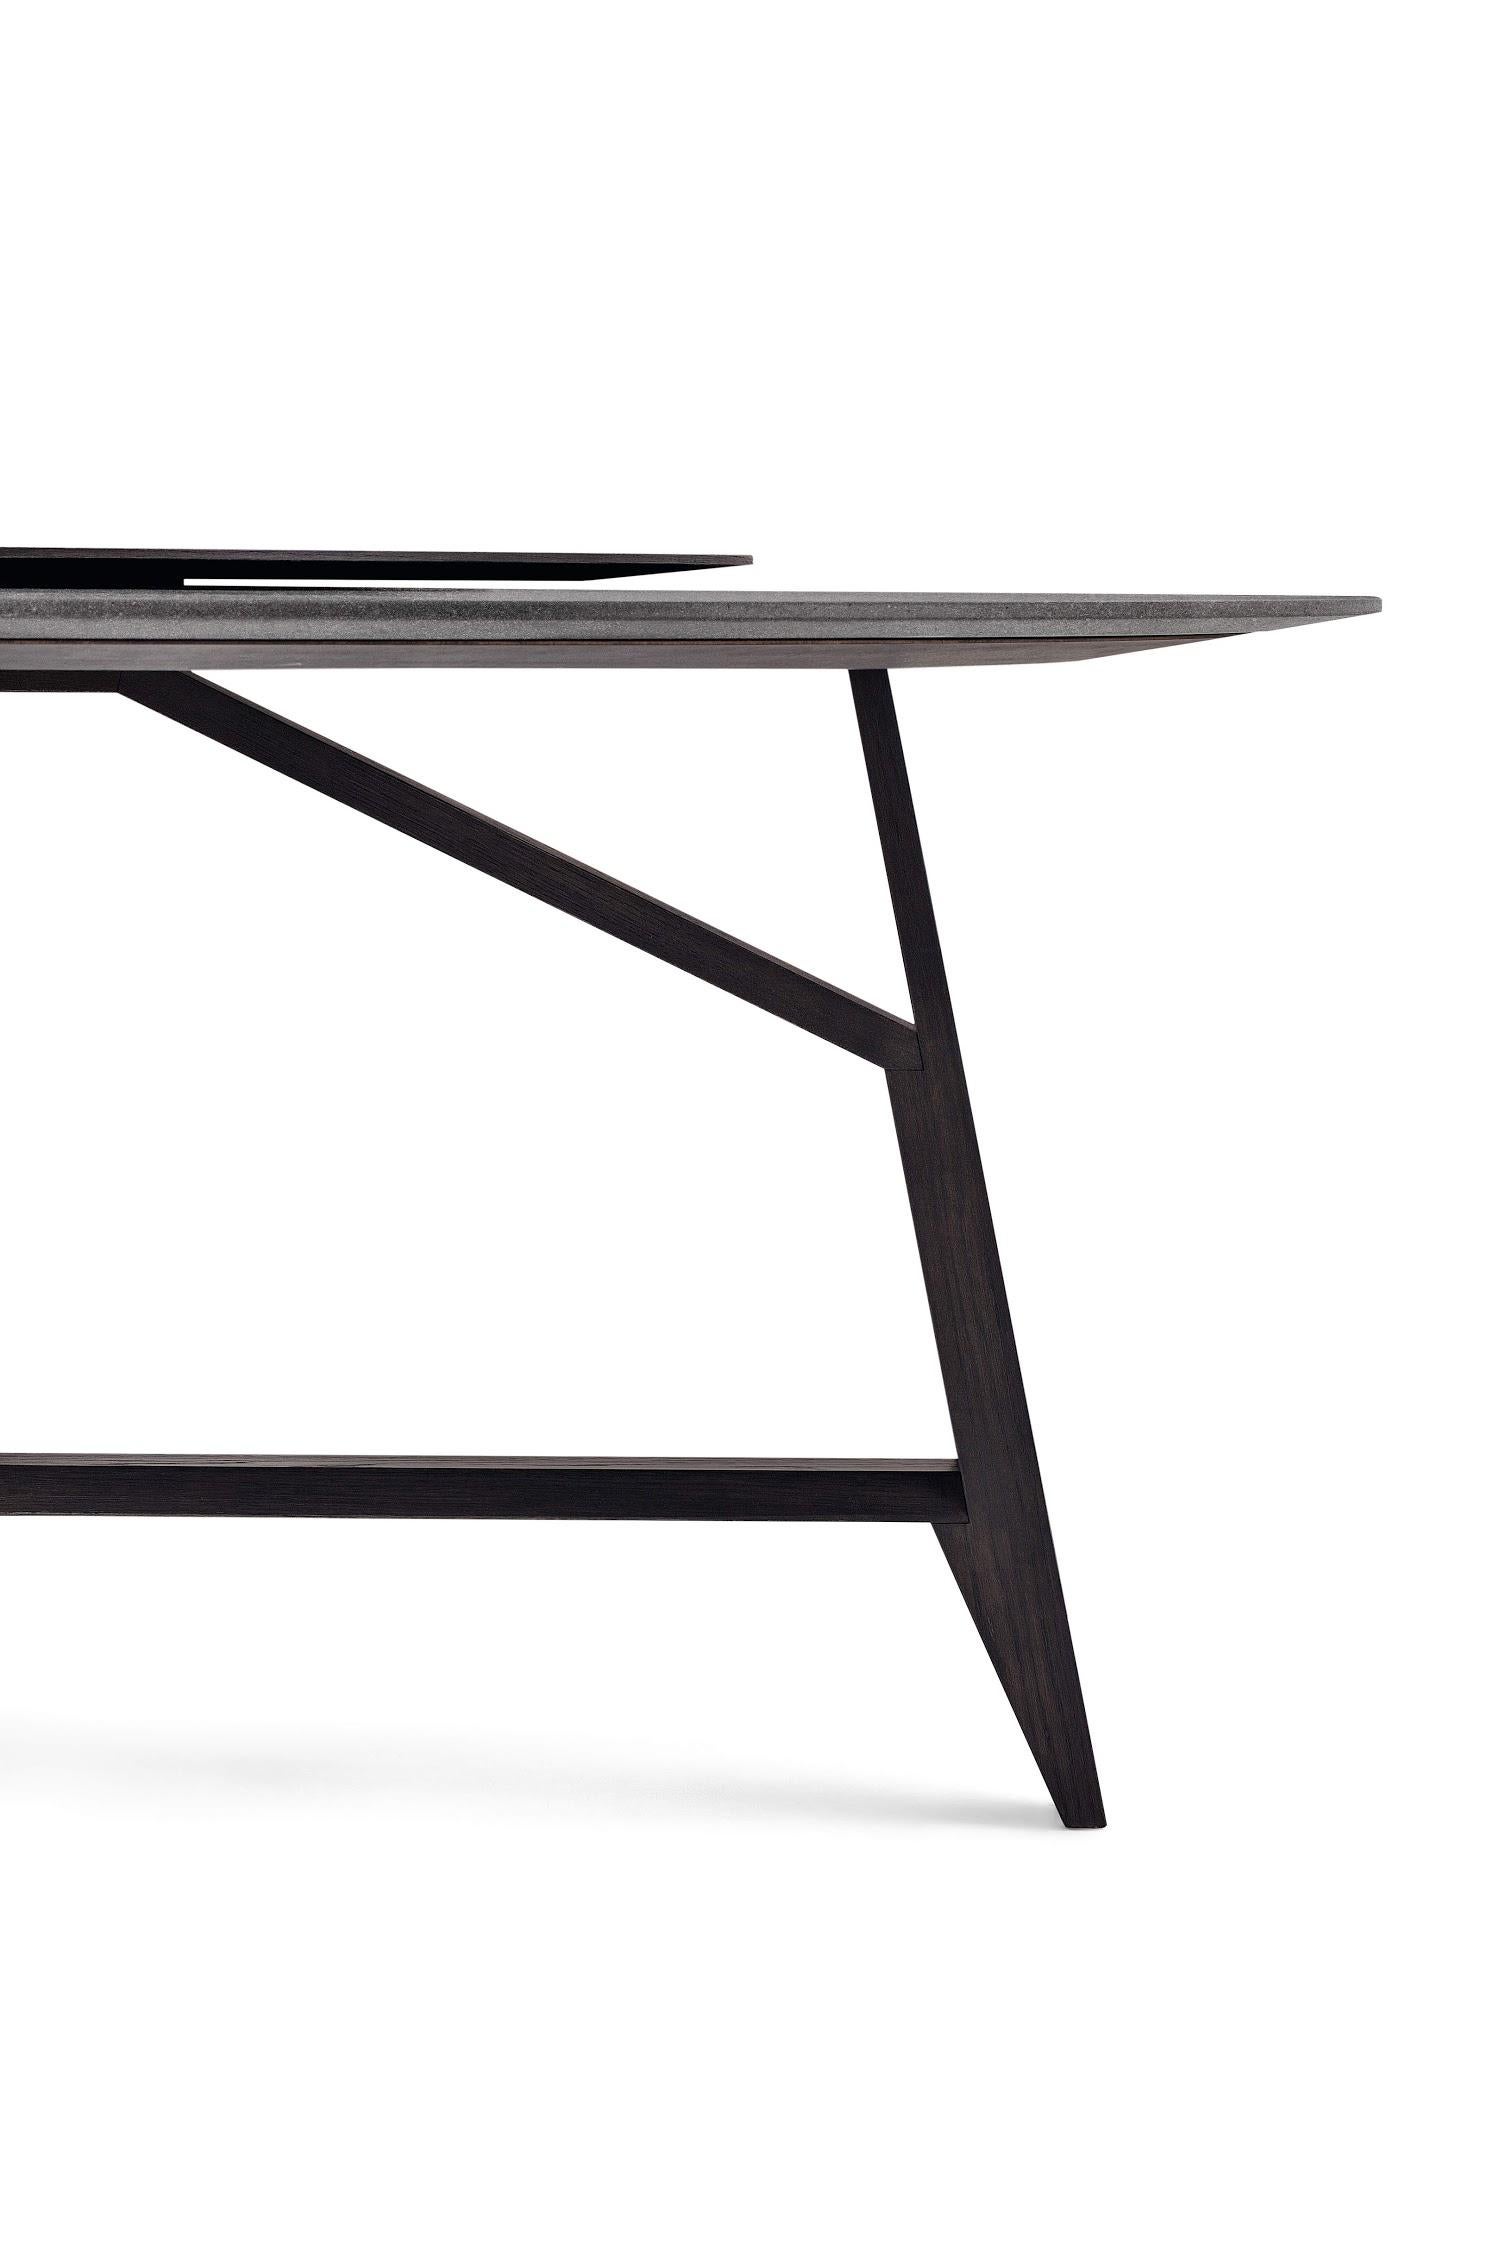 Controvento Table in Charcoal Gray with Revolving Tray by Busnelli im Angebot 1